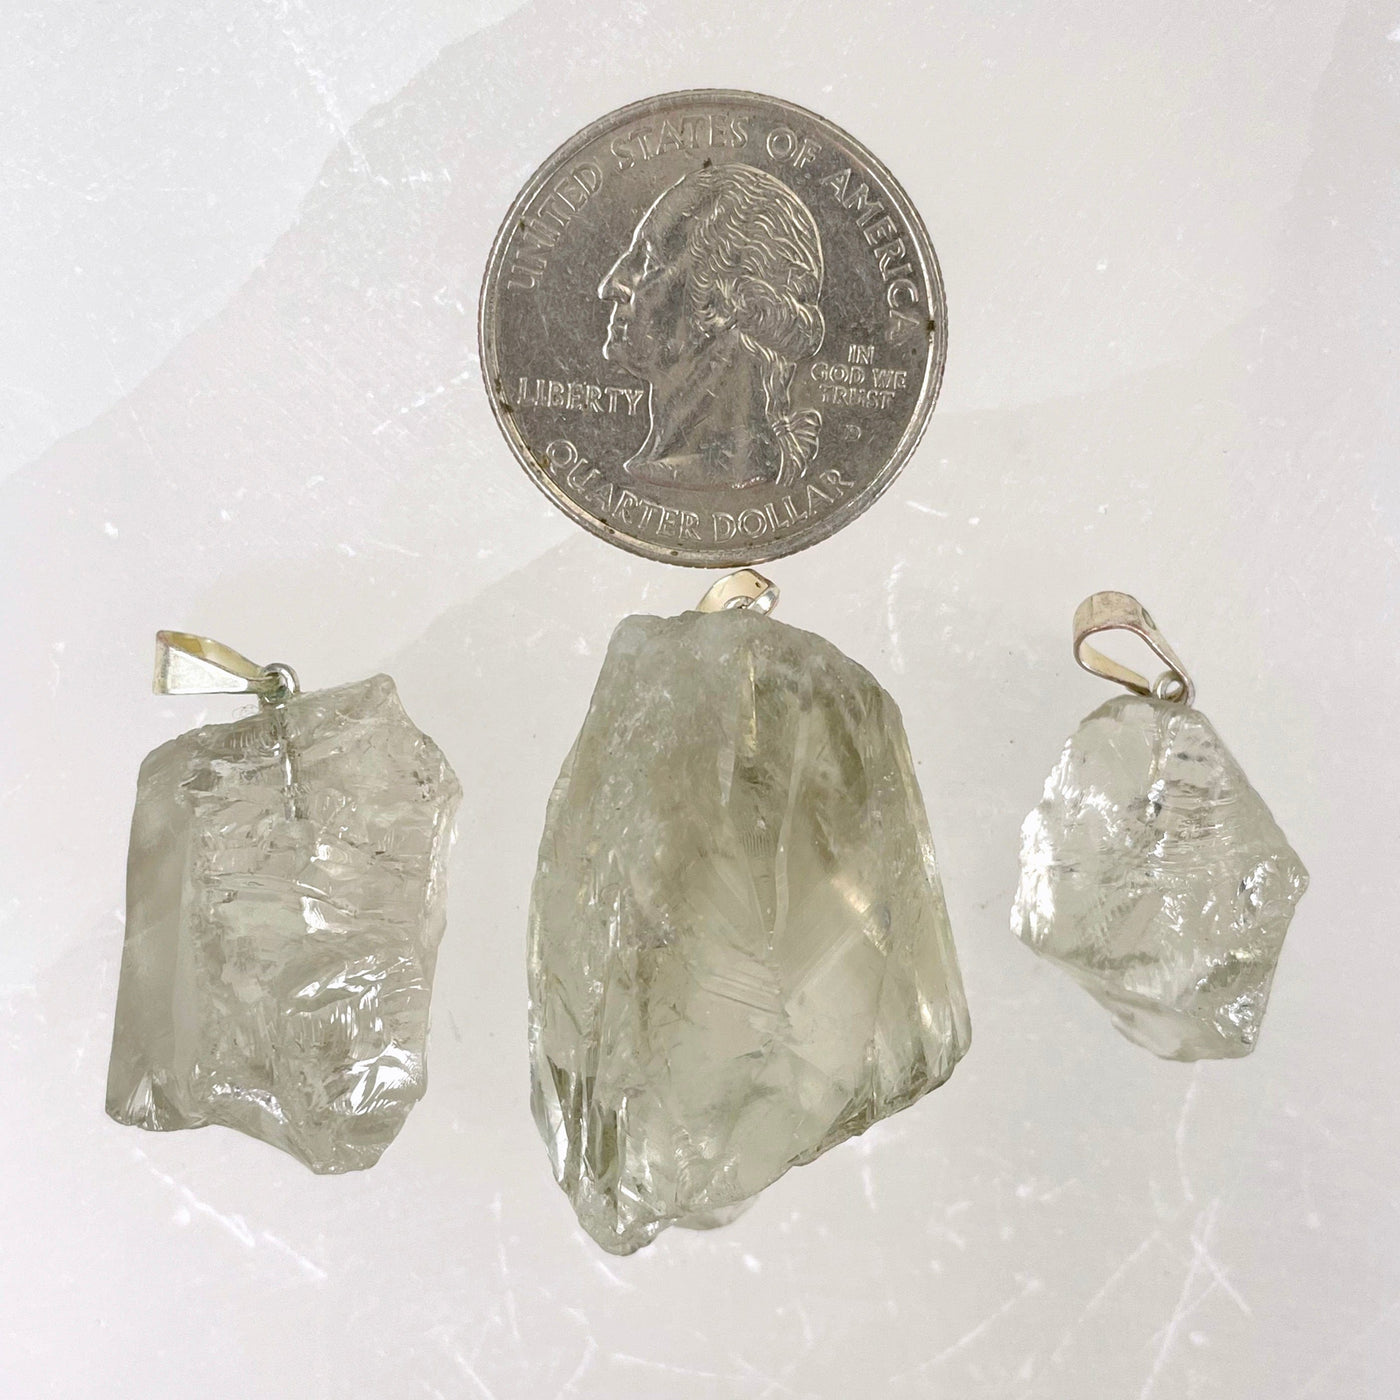 three prasiolite rough pendants with quarter for size reference